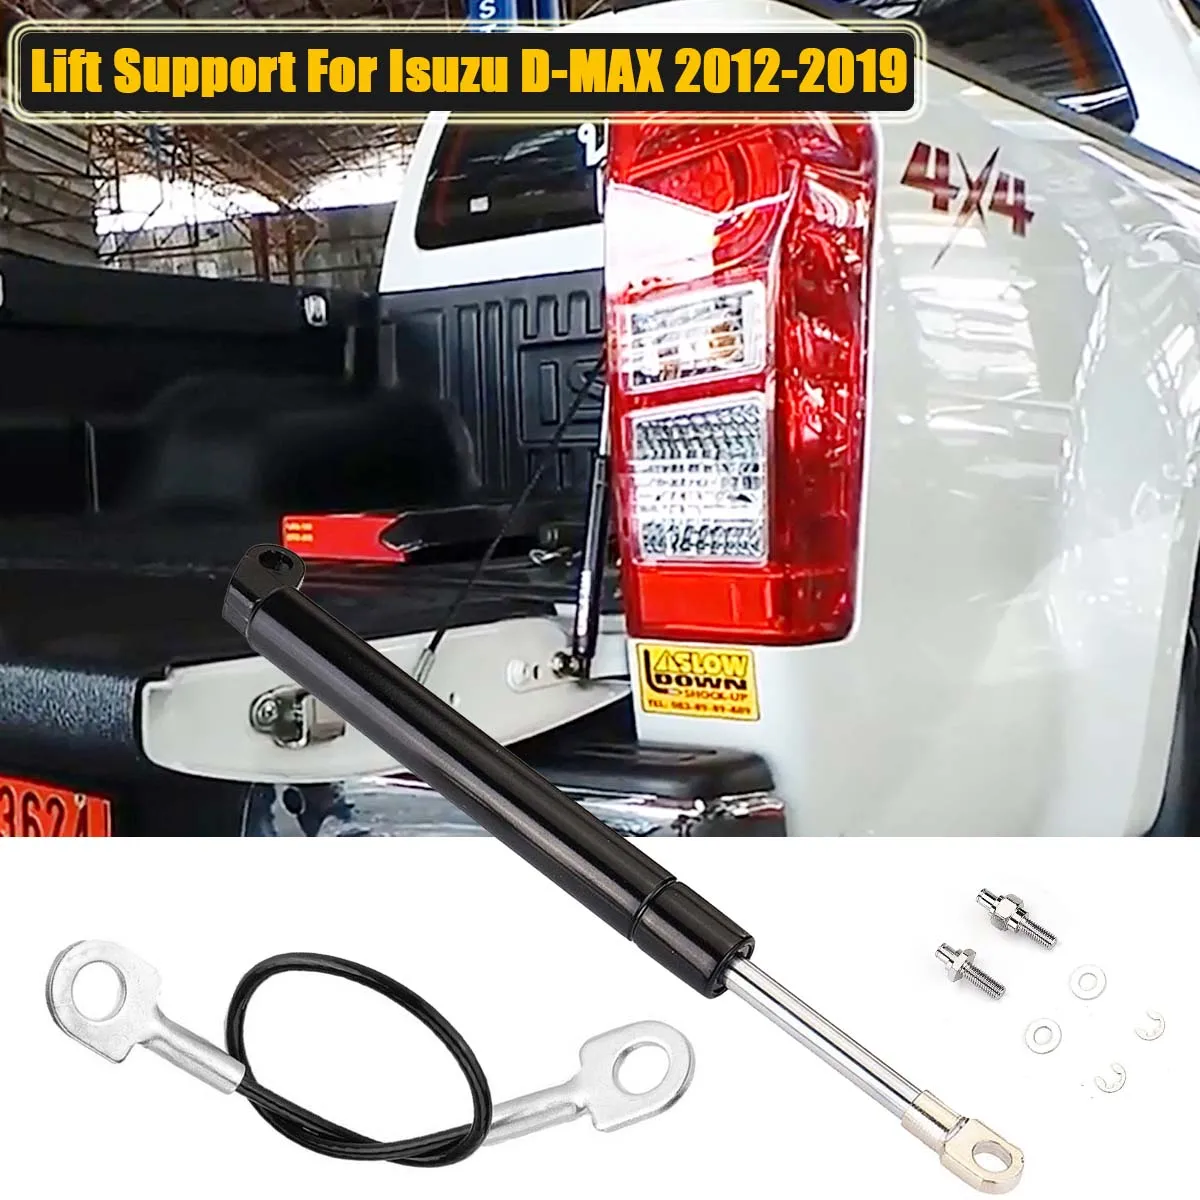 

Rear Tailgate Slow Down Trunk Tail Gate Strut Damper Gas Spring Support Lift For Isuzu DMAX D-Max 2012-2019 Car Accessories